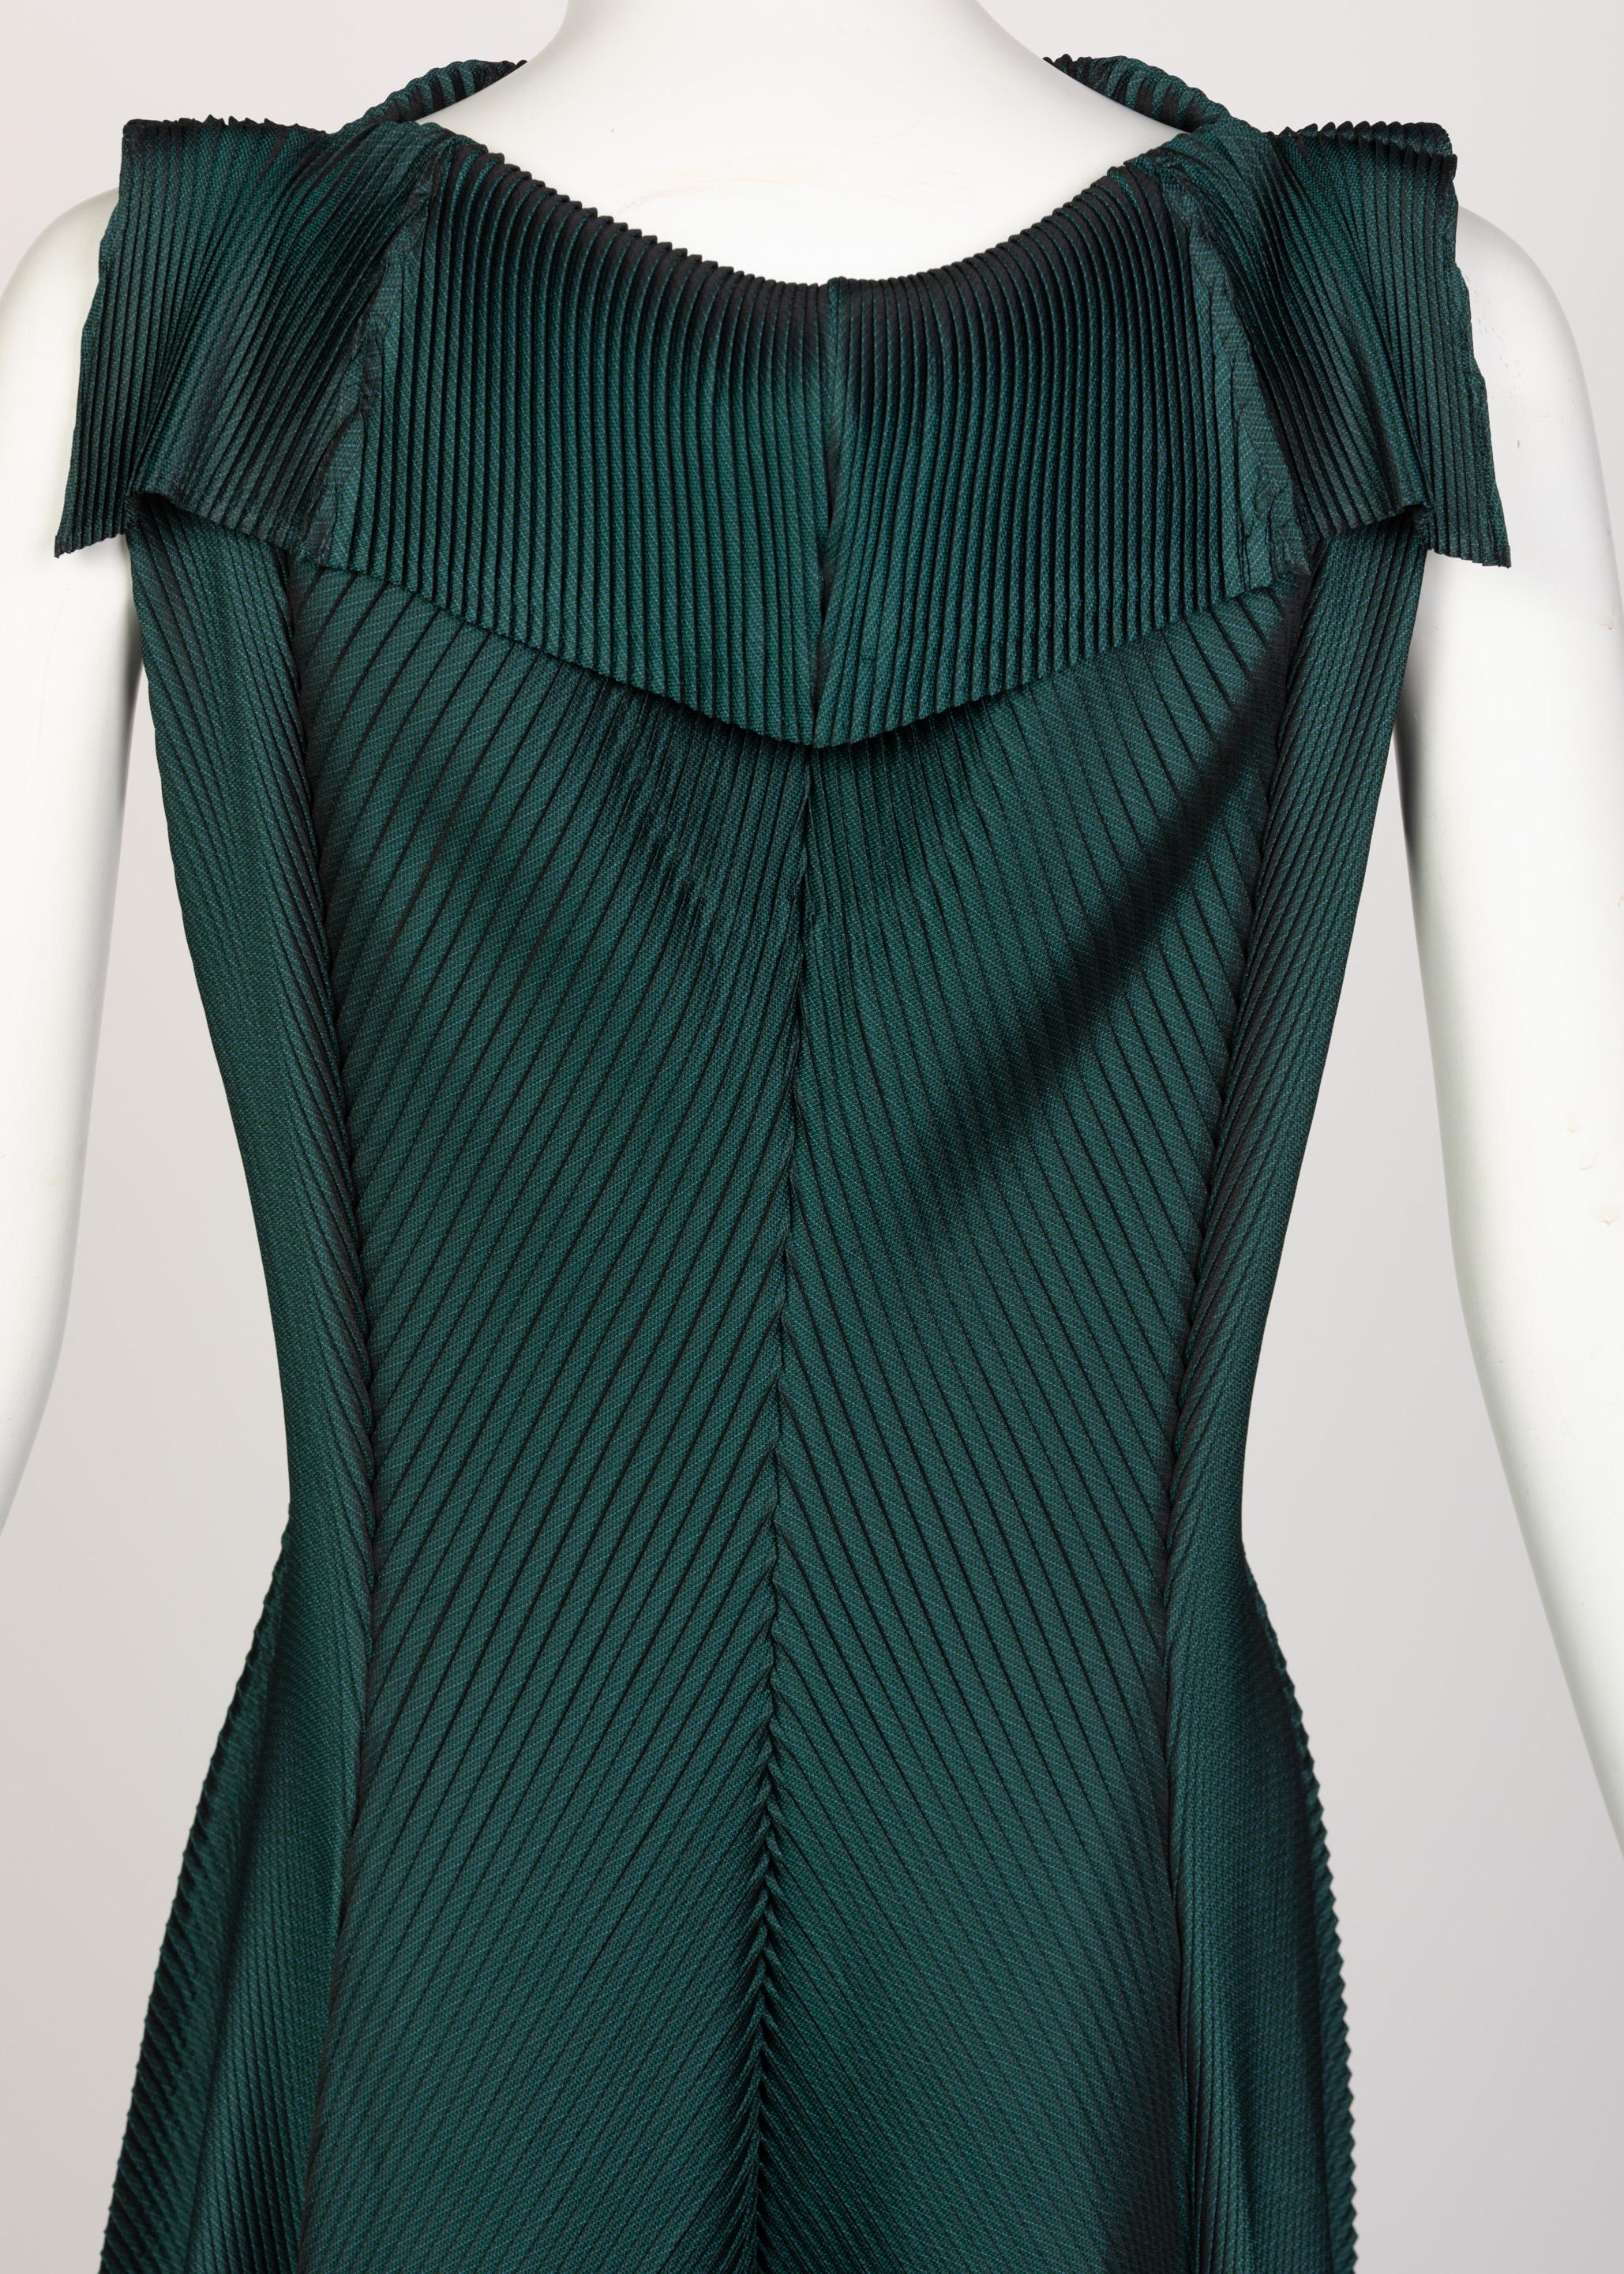 Issey Miyake Blue Green Pleated Sleeveless Dress In Excellent Condition In Boca Raton, FL